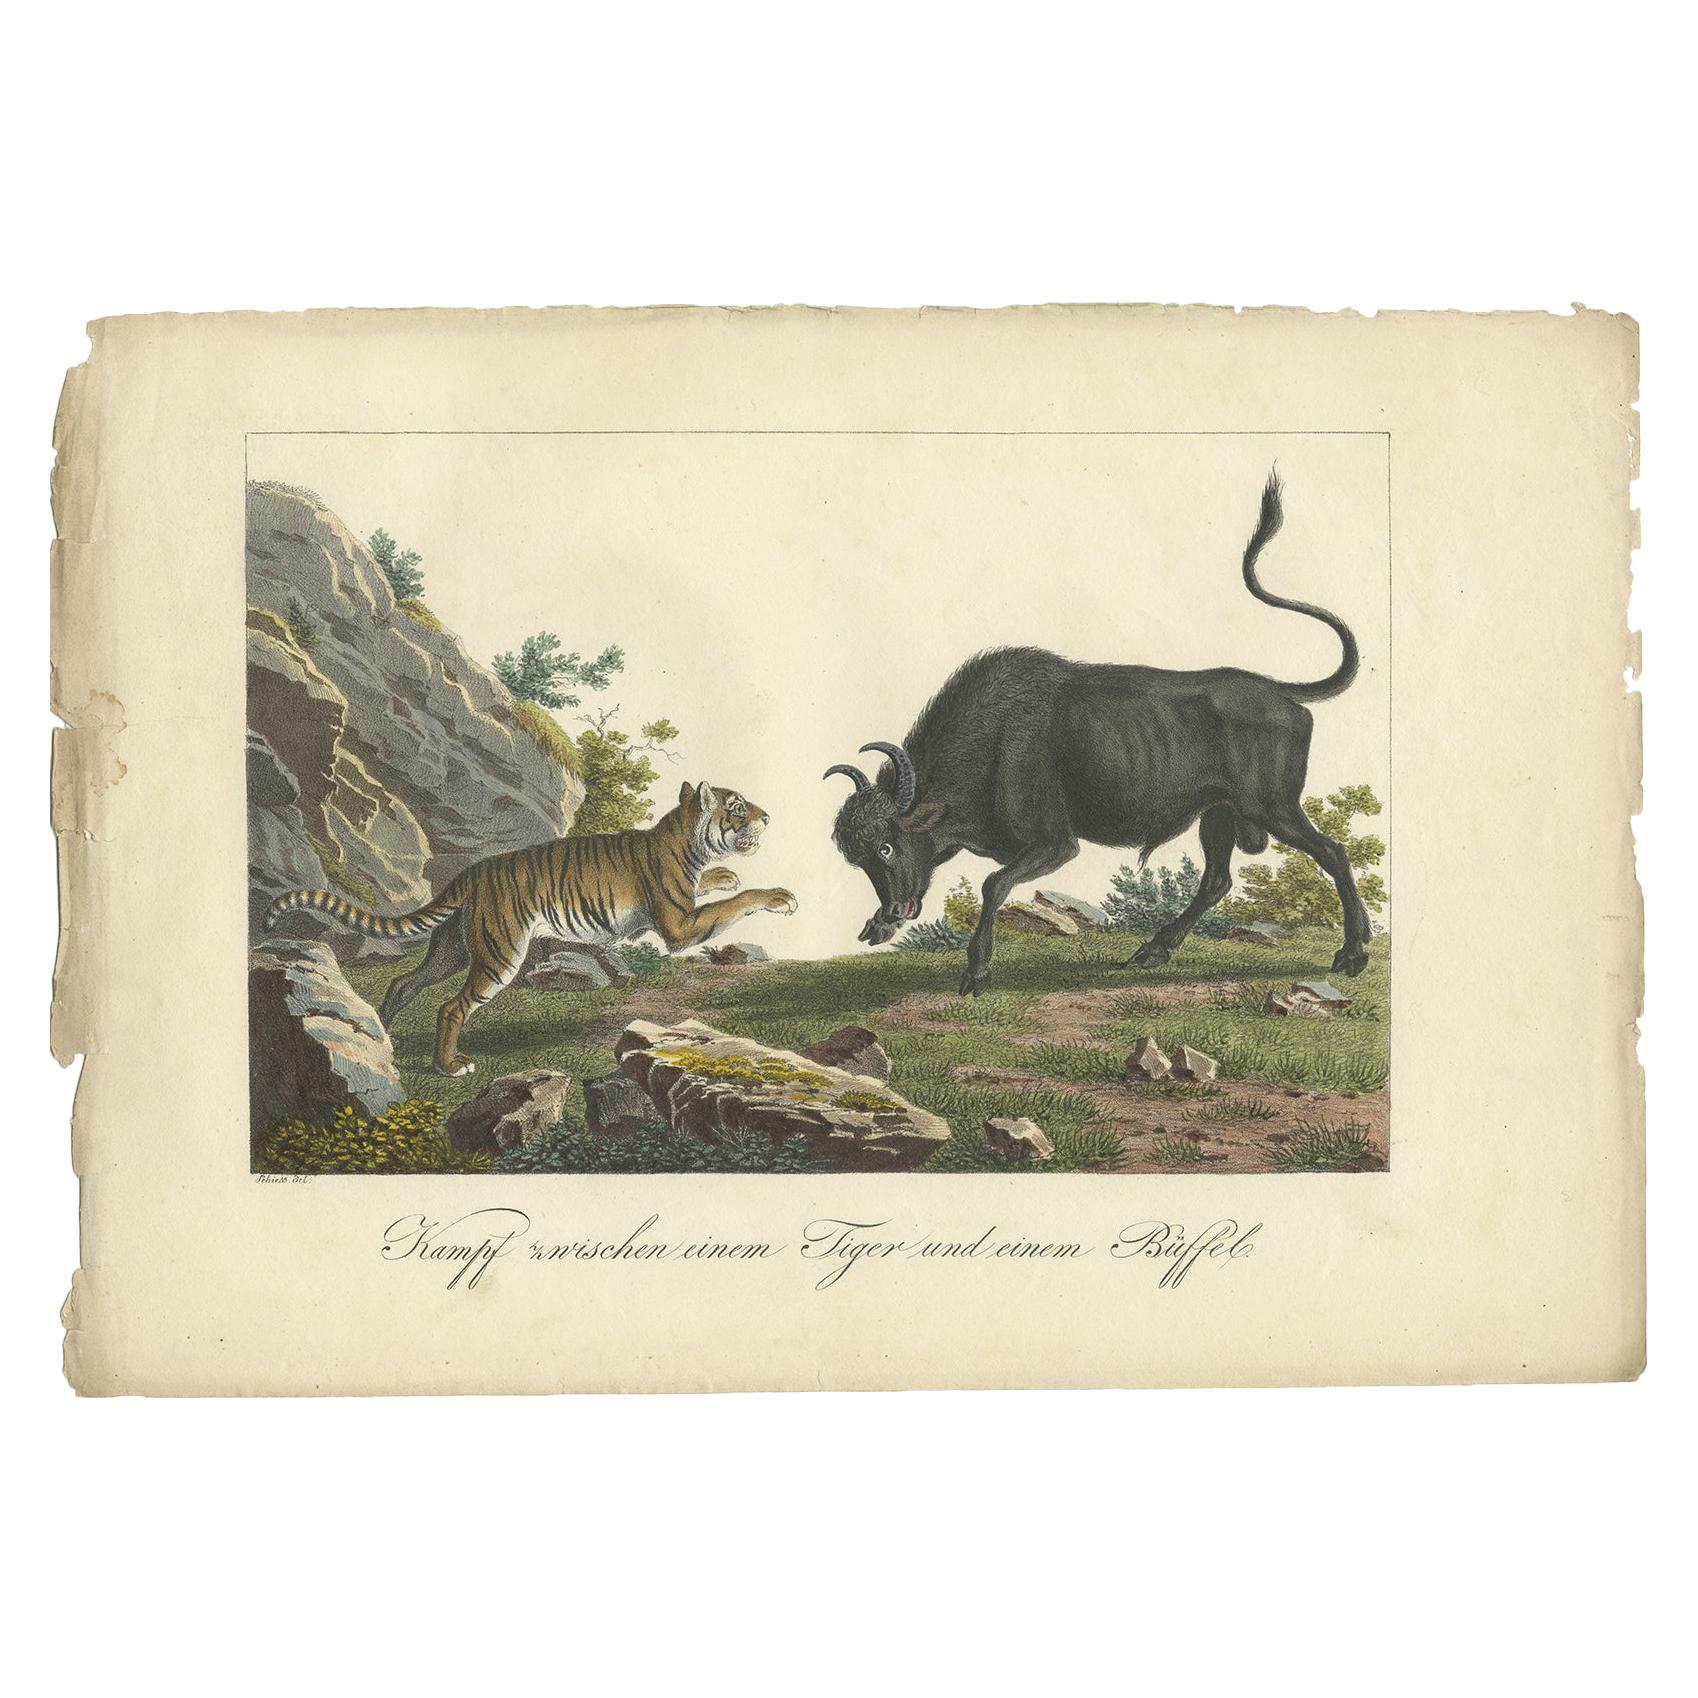 Antique Hand-colored Print of a Fighting Tiger and Buffalo in Indonesia, c.1830